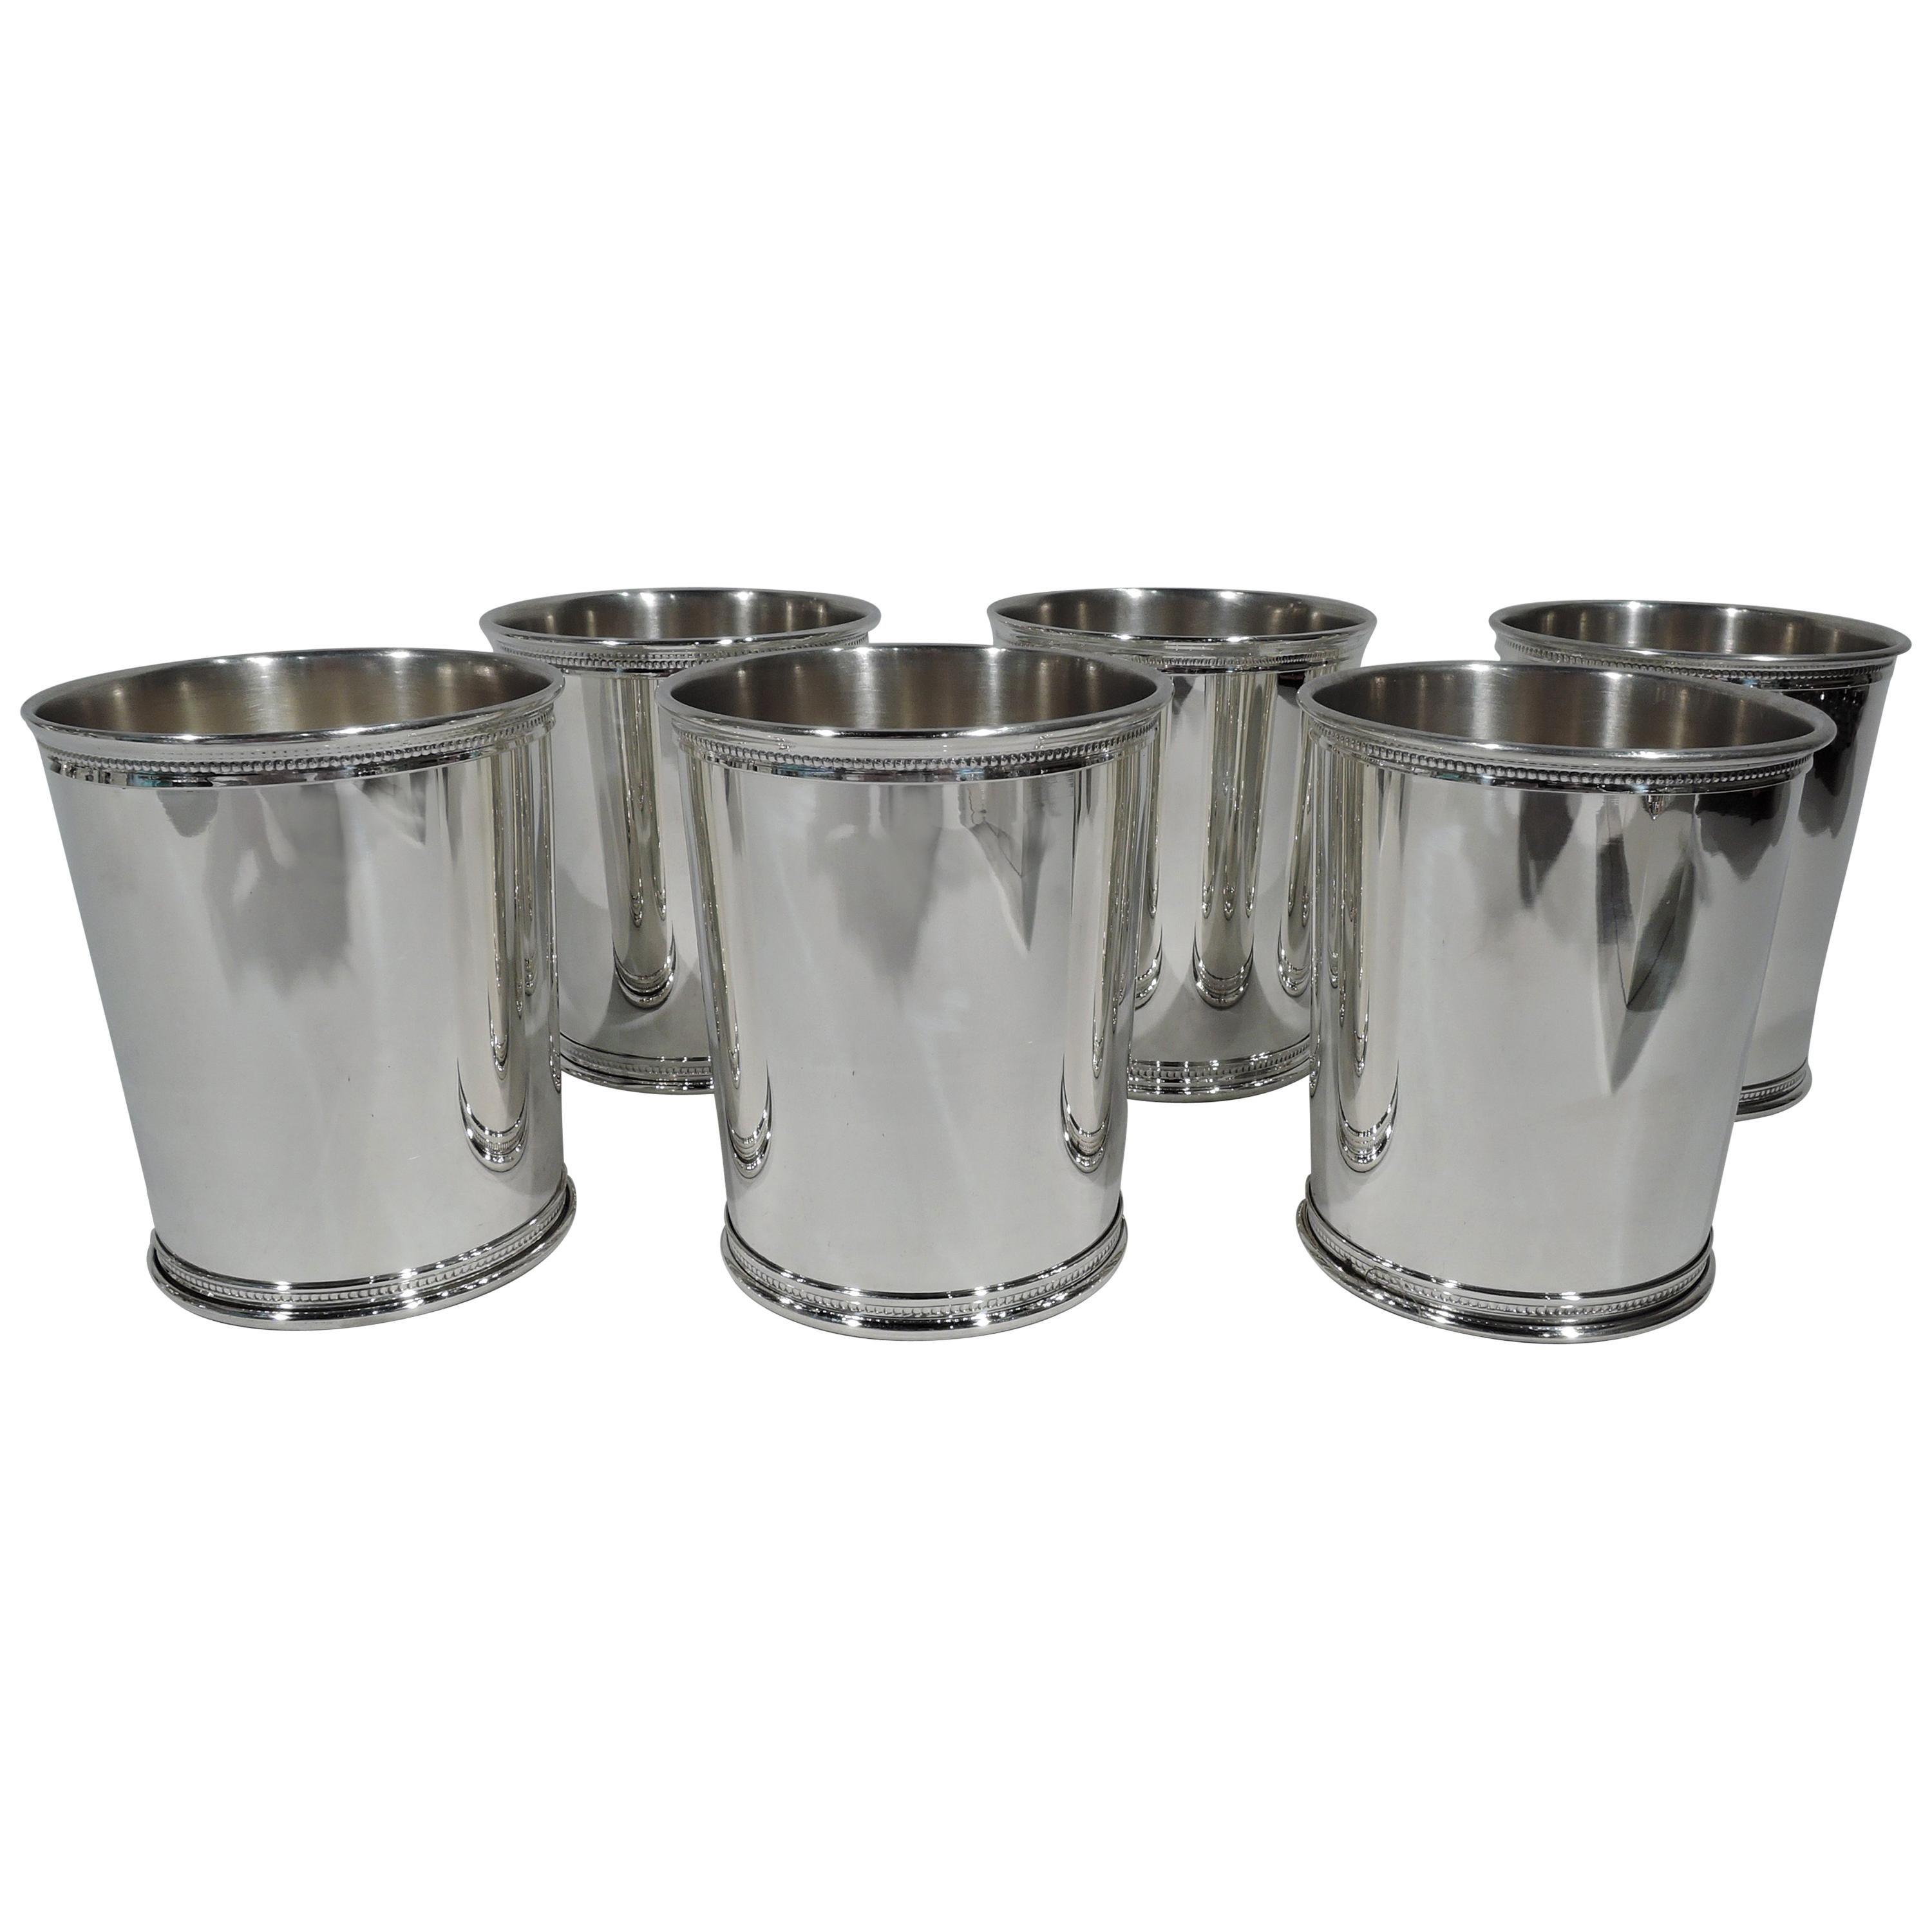 Set of 6 Reed & Barton Sterling Silver Mint Julep Cups from Carter Era